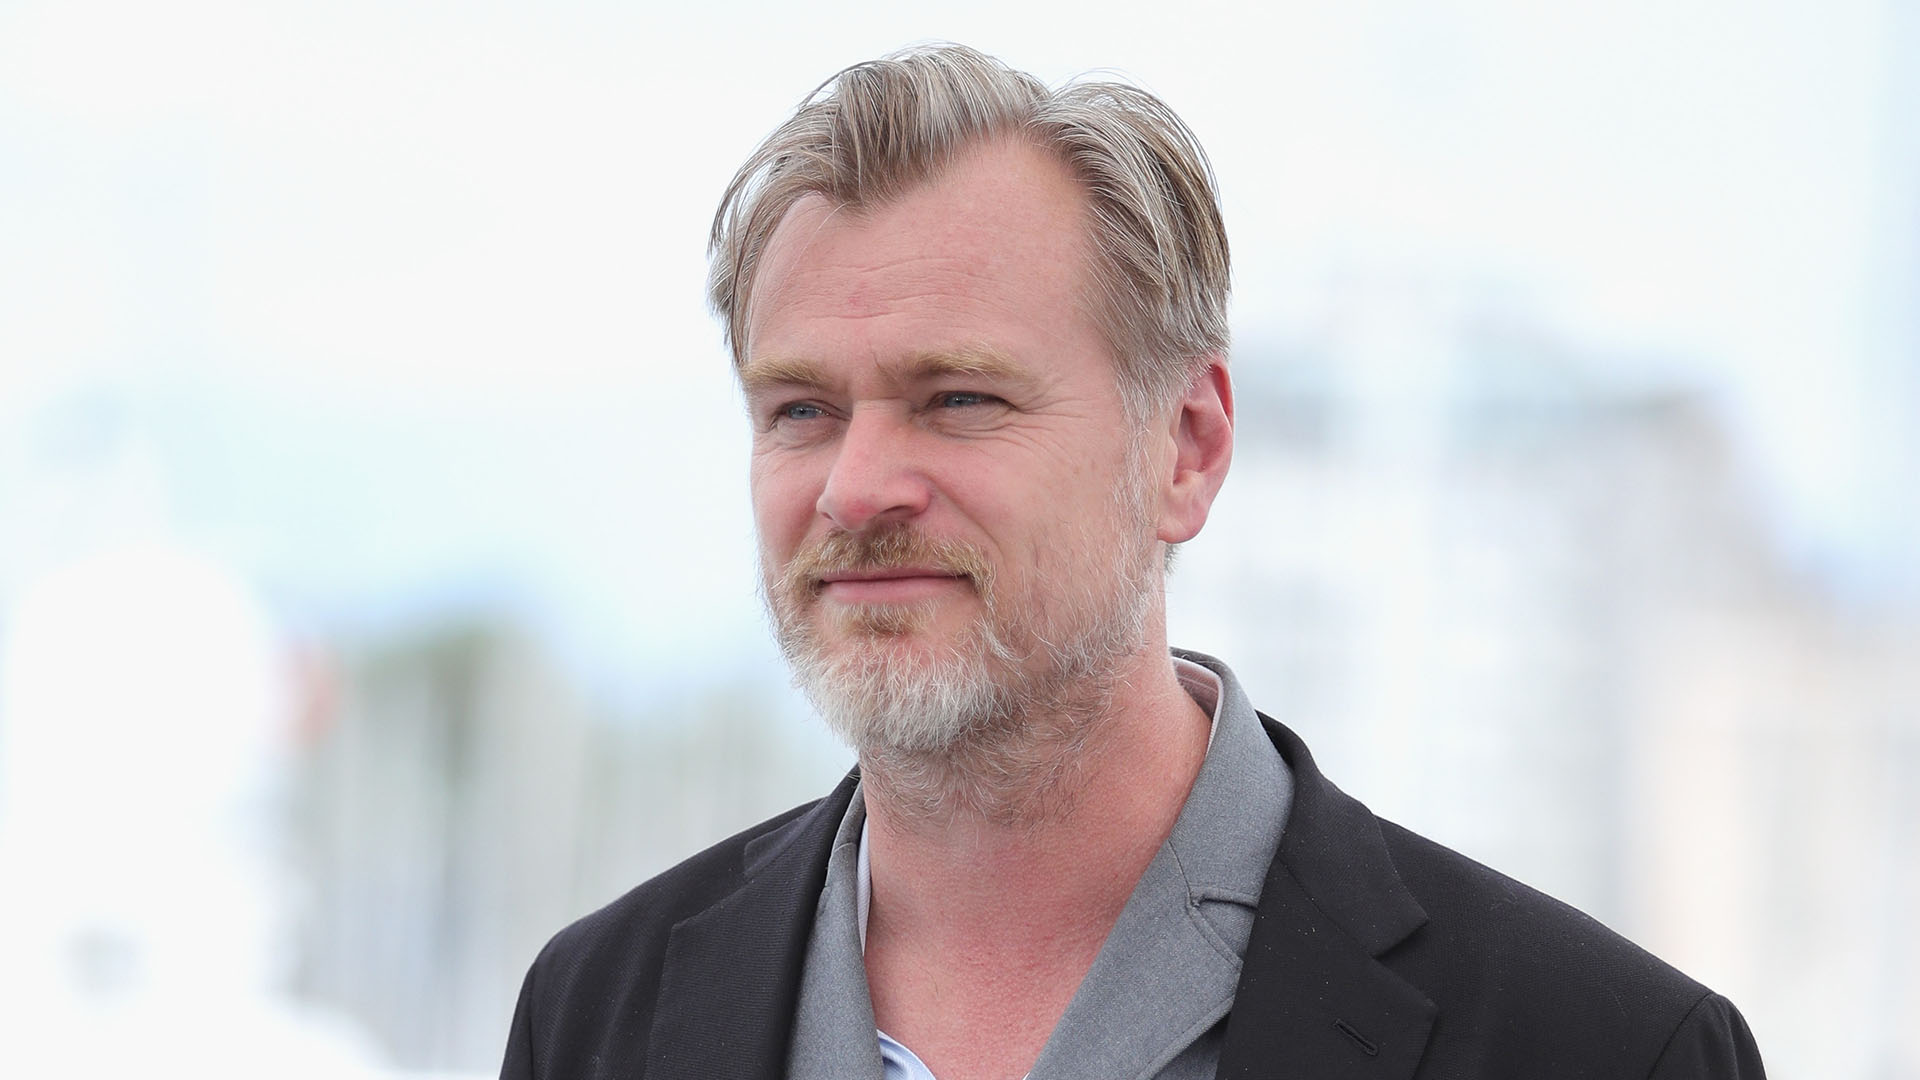 Director Christopher Nolan Doesn't Have a Smartphone or Use Email